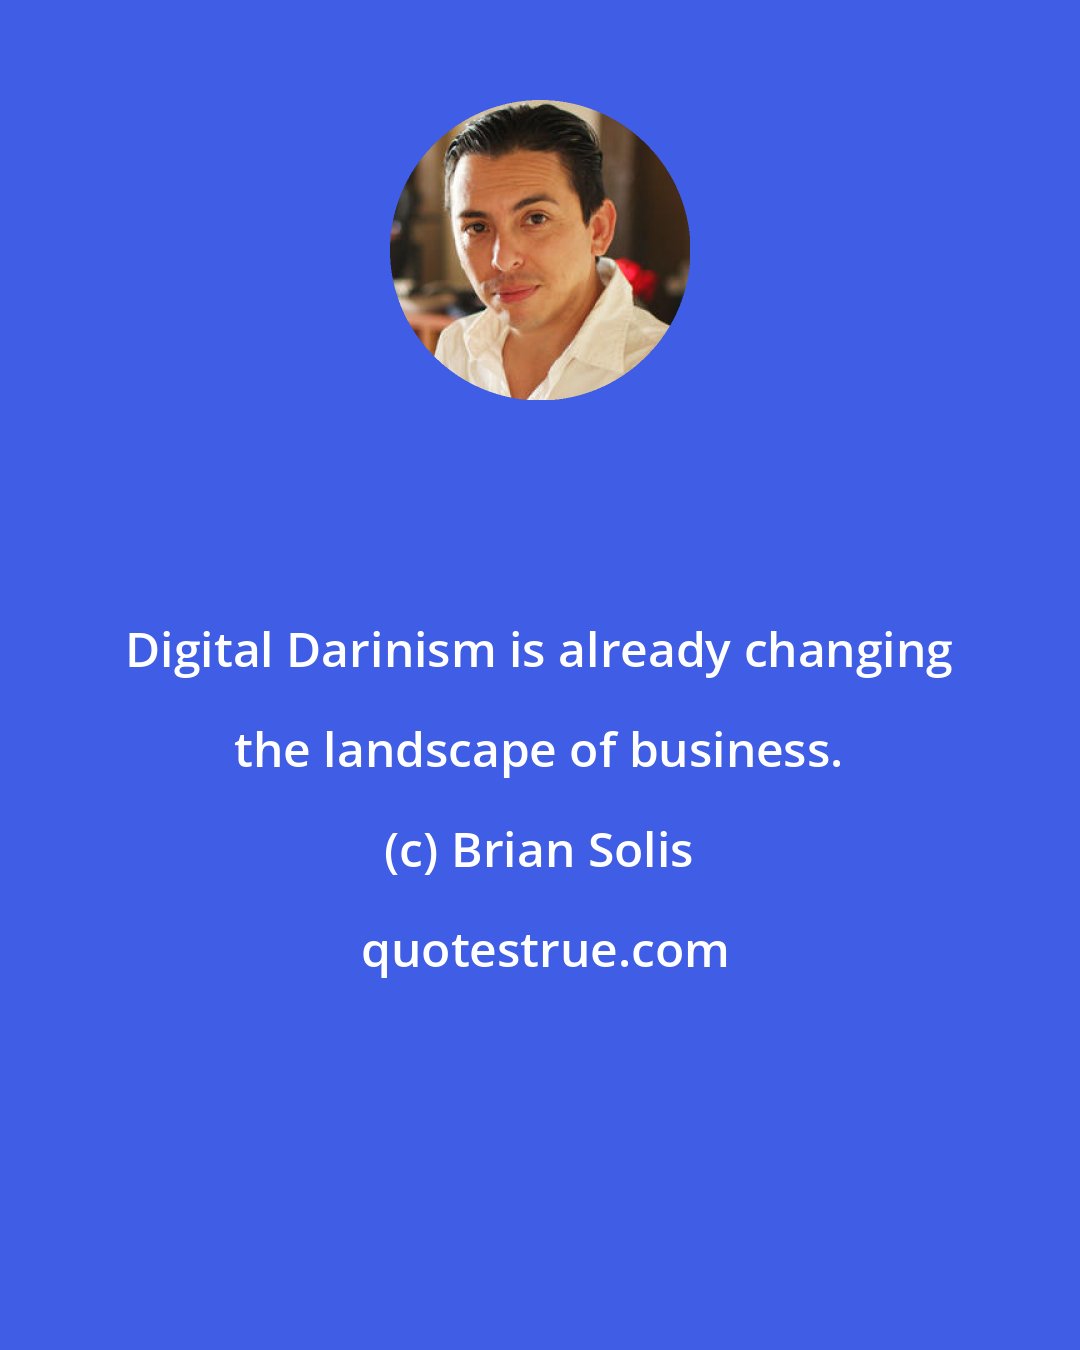 Brian Solis: Digital Darinism is already changing the landscape of business.